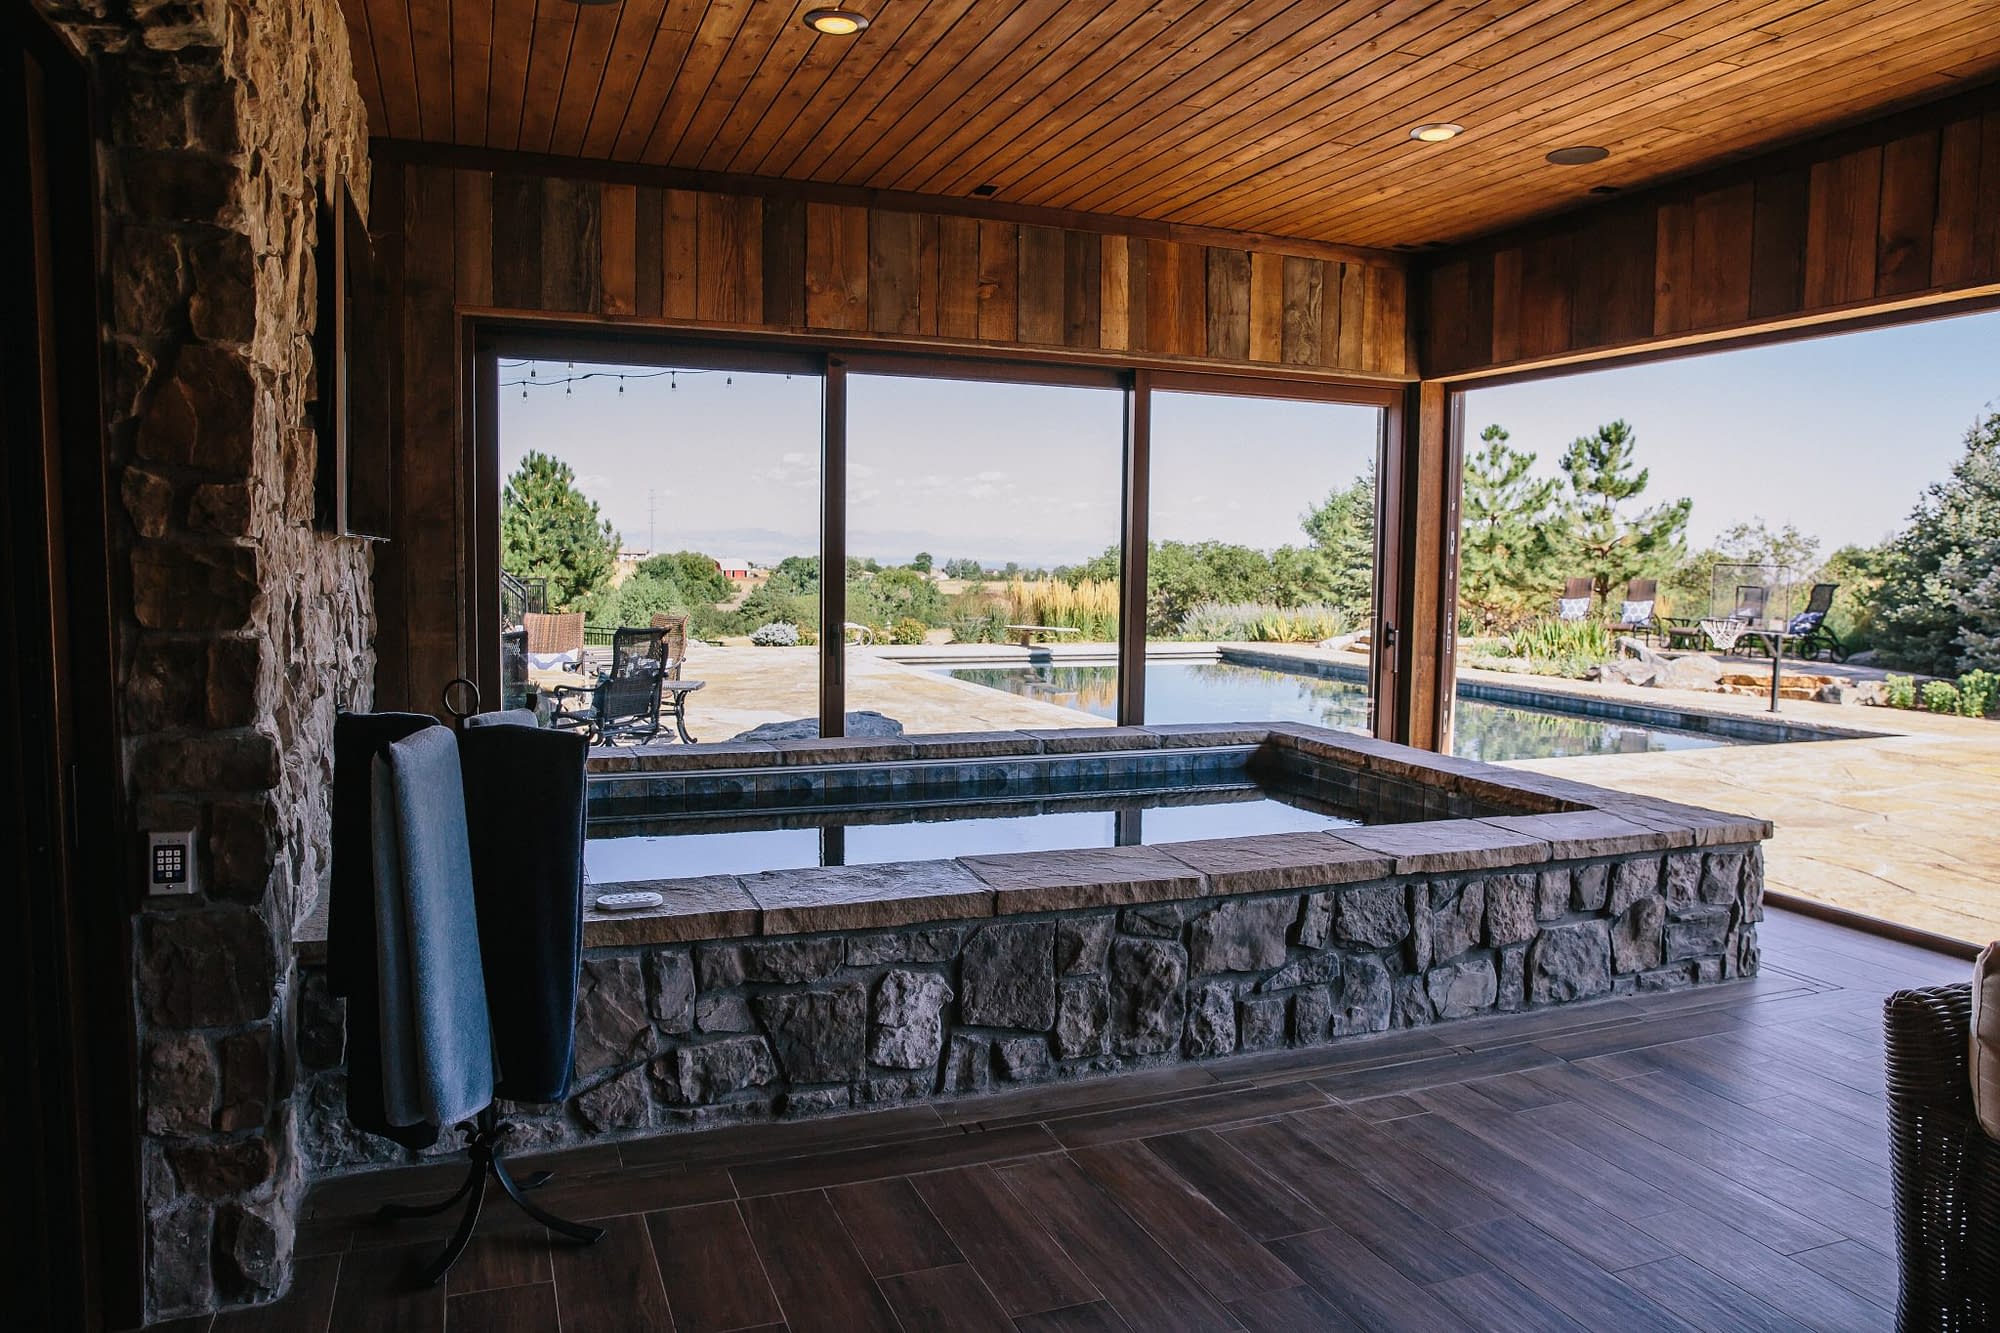 Two lift slide doors open the hot tub area to the patio and pool